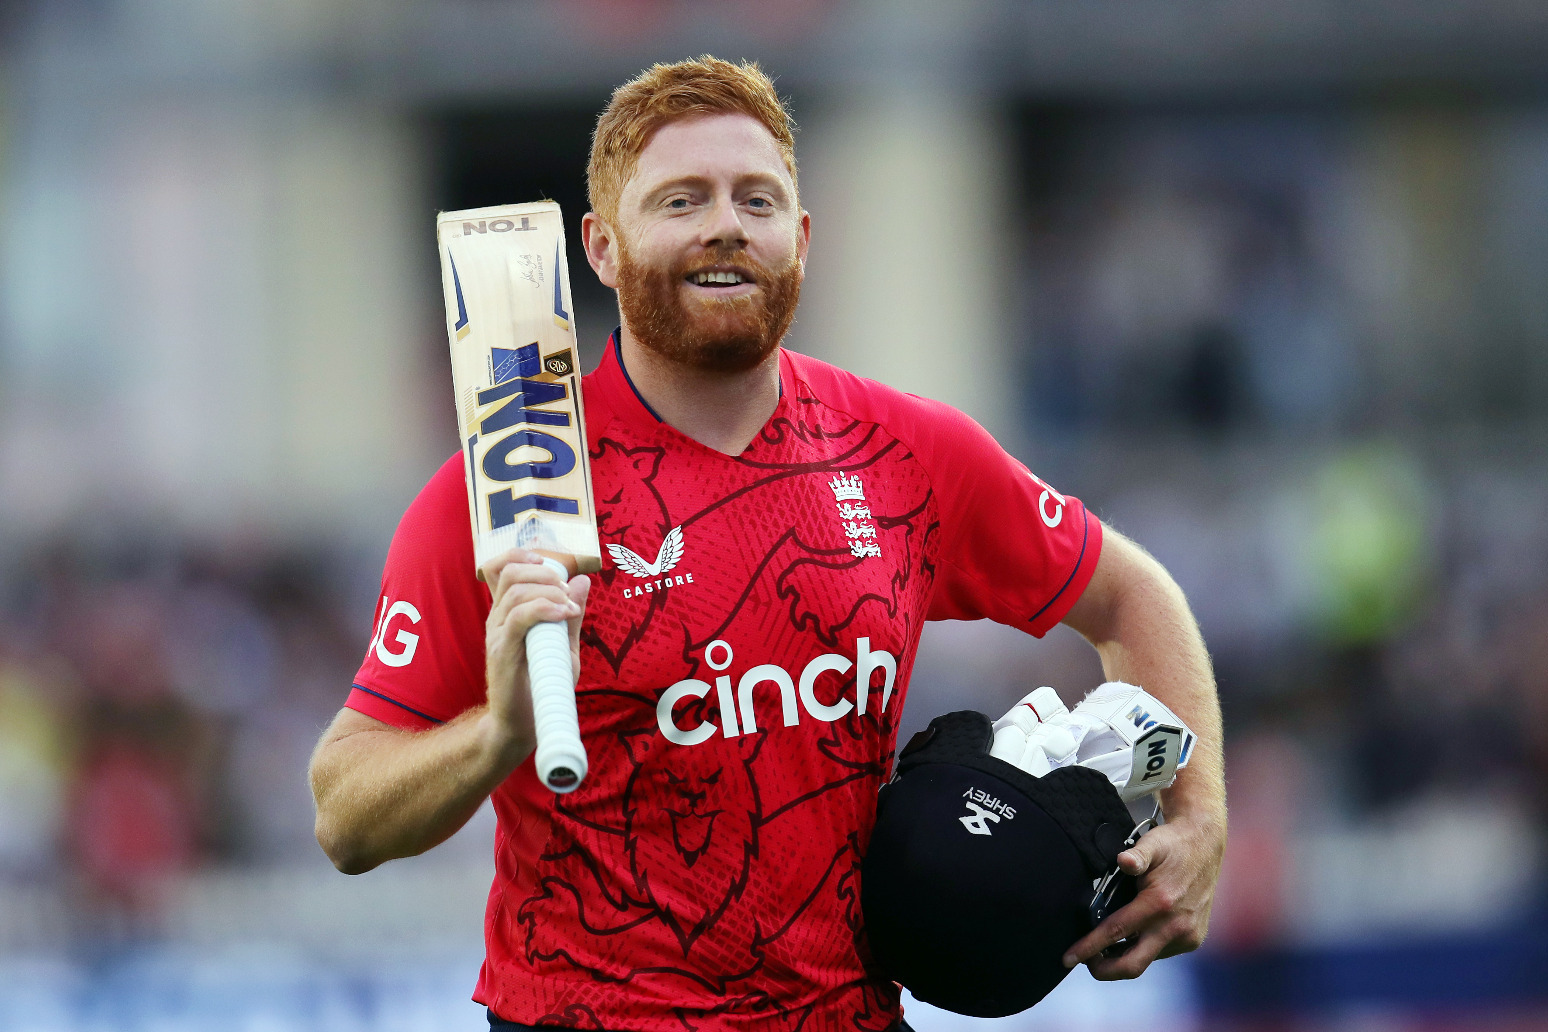 England’s Jonny Bairstow rules himself out of T20 World Cup due to injury 